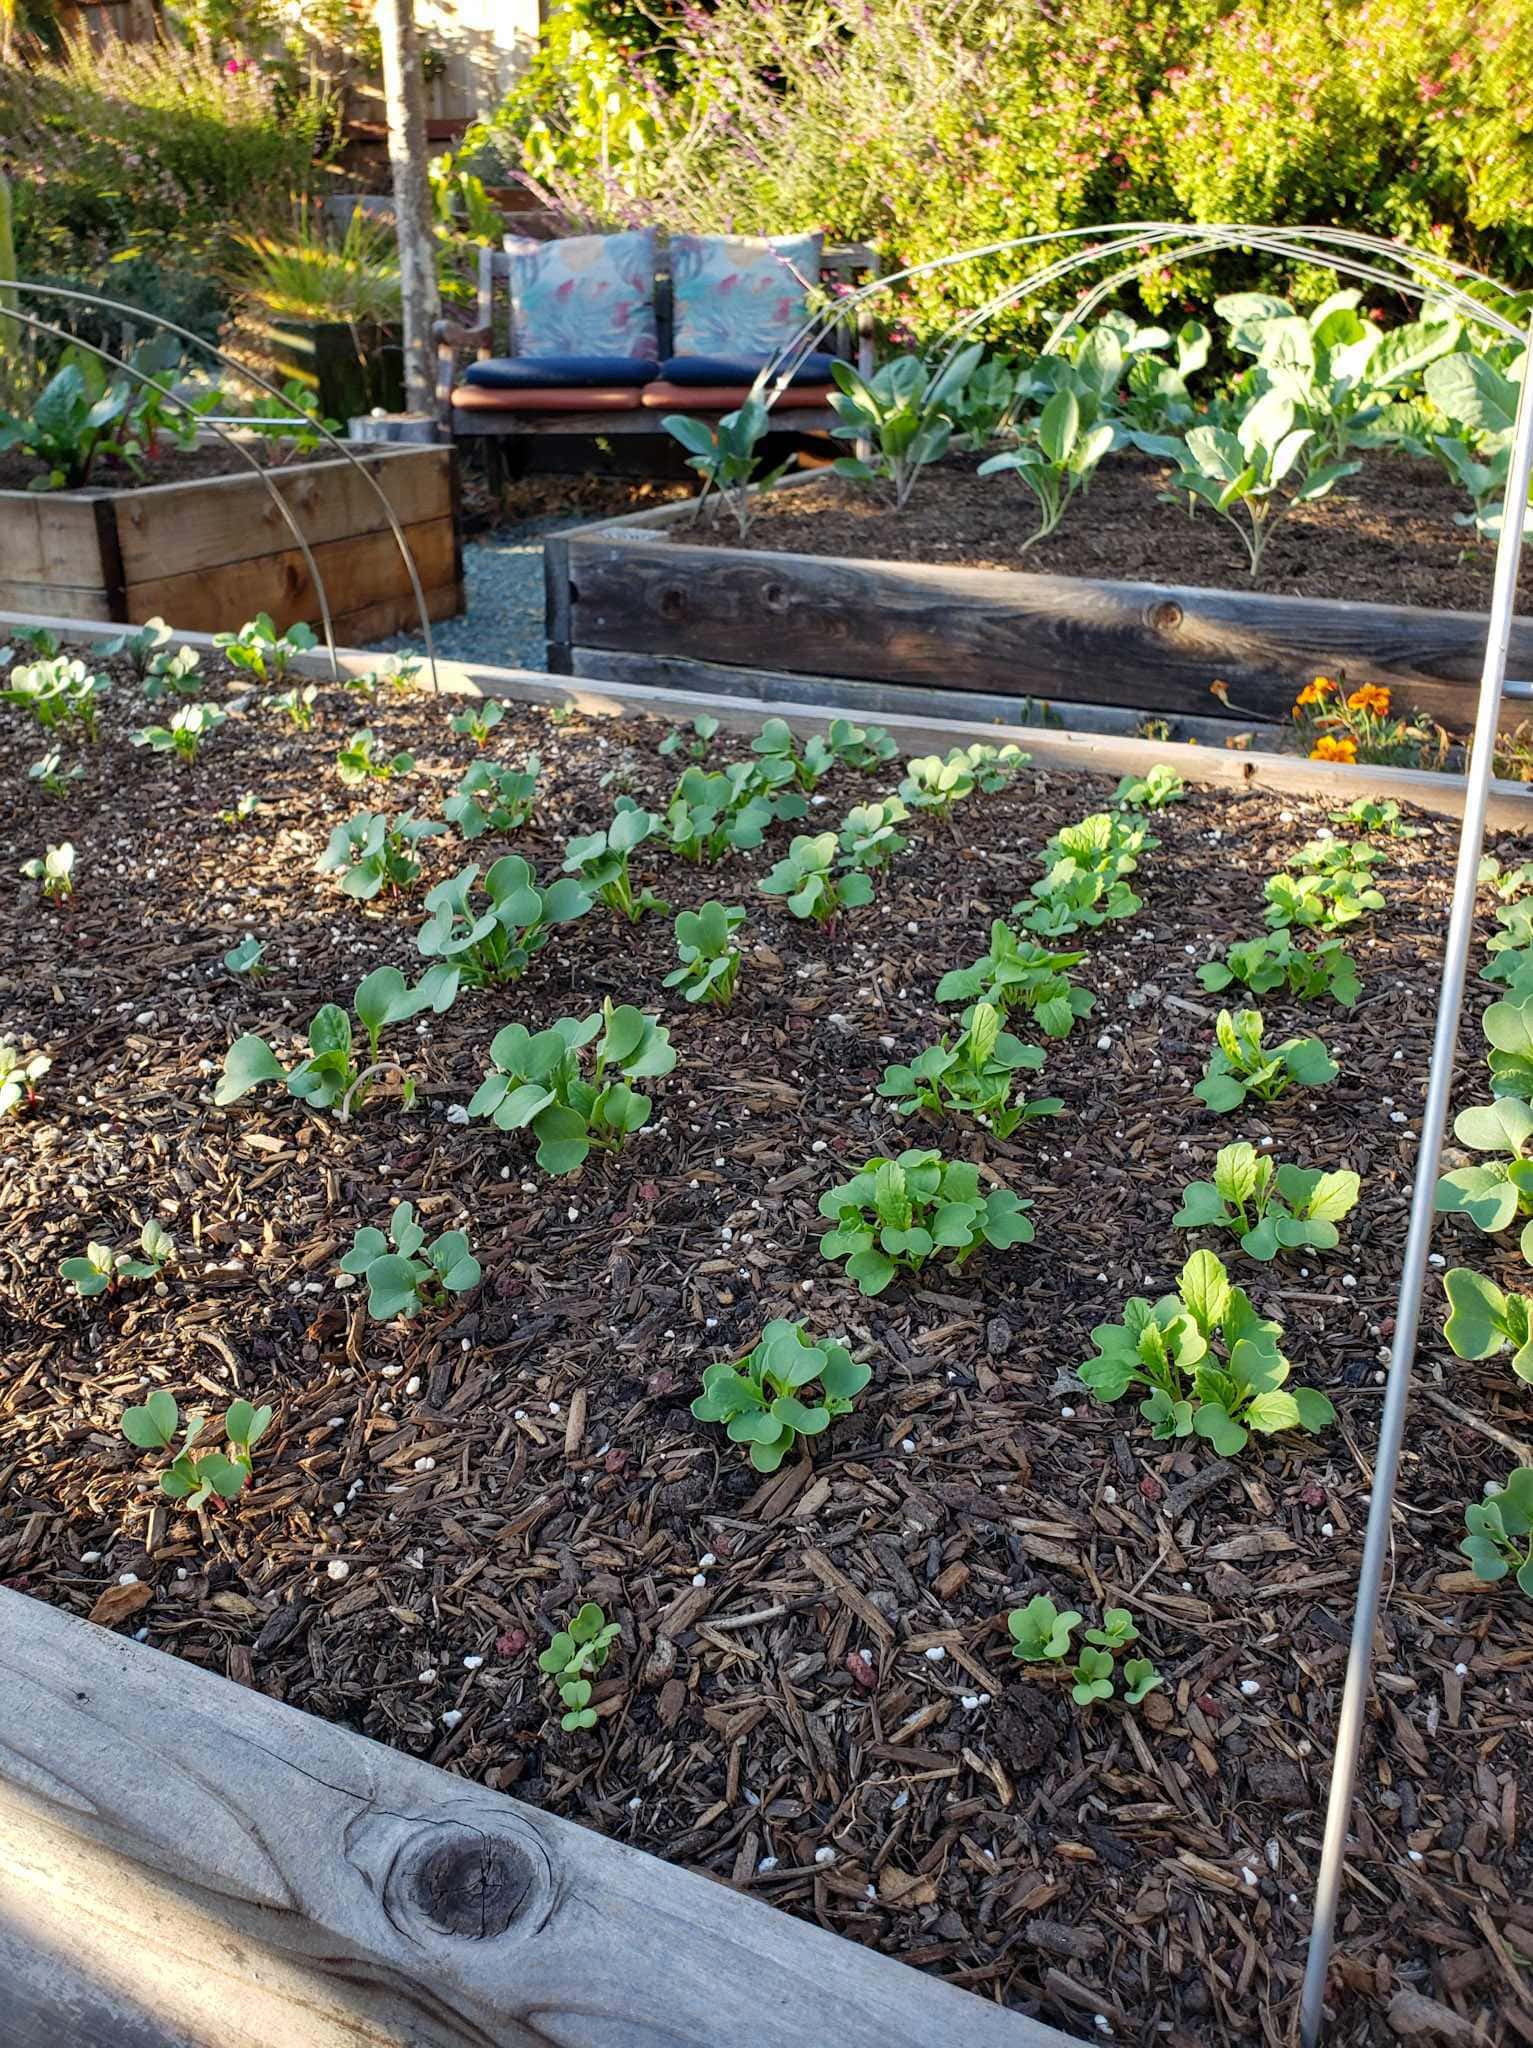 A close up image of a raised garden bed in the foreground and two raised beds in the background. Tender seedlings are growing in all of the beds with radish seedlings being the smallest in the foreground. The beds are mulched with woody compost as garden mulch to keep the soil moist and biologically active below. 